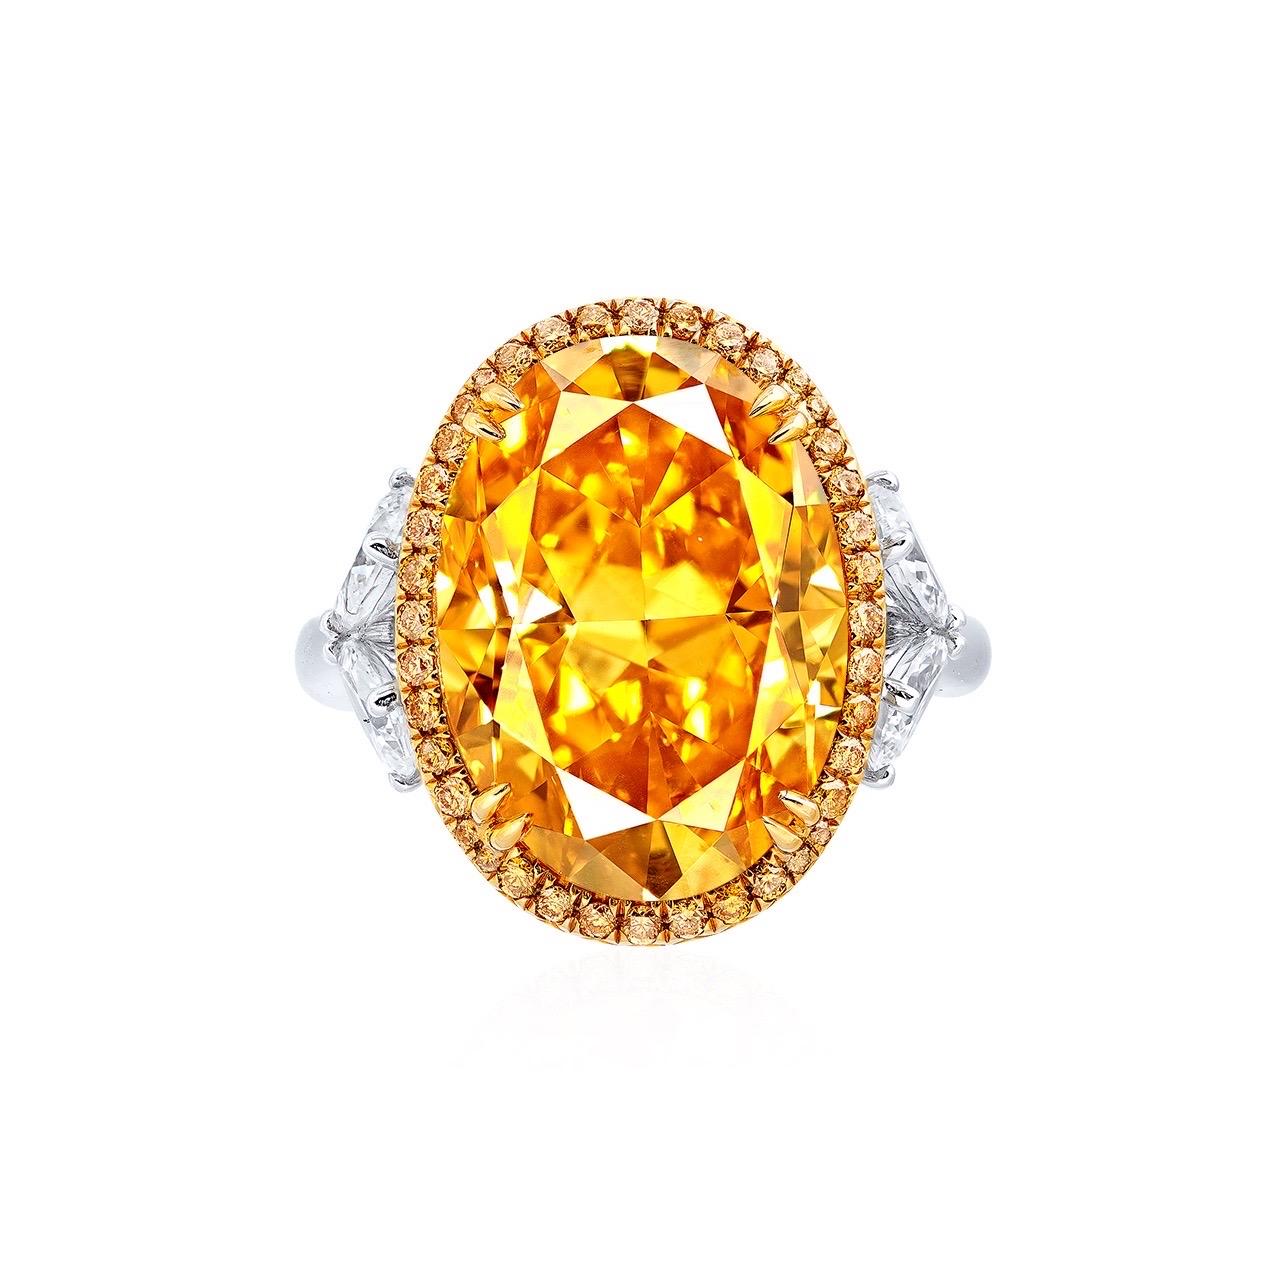 From the Museum Vault at Emilio Jewelry, a dealer located on New York's iconic 5th Avenue,
Center Stone: Gia certified over 8.00ct natural Fancy Deep Orange Yellow diamond
Setting: White diamonds totaling approximately 1.45 carats	
Certificate: GIA